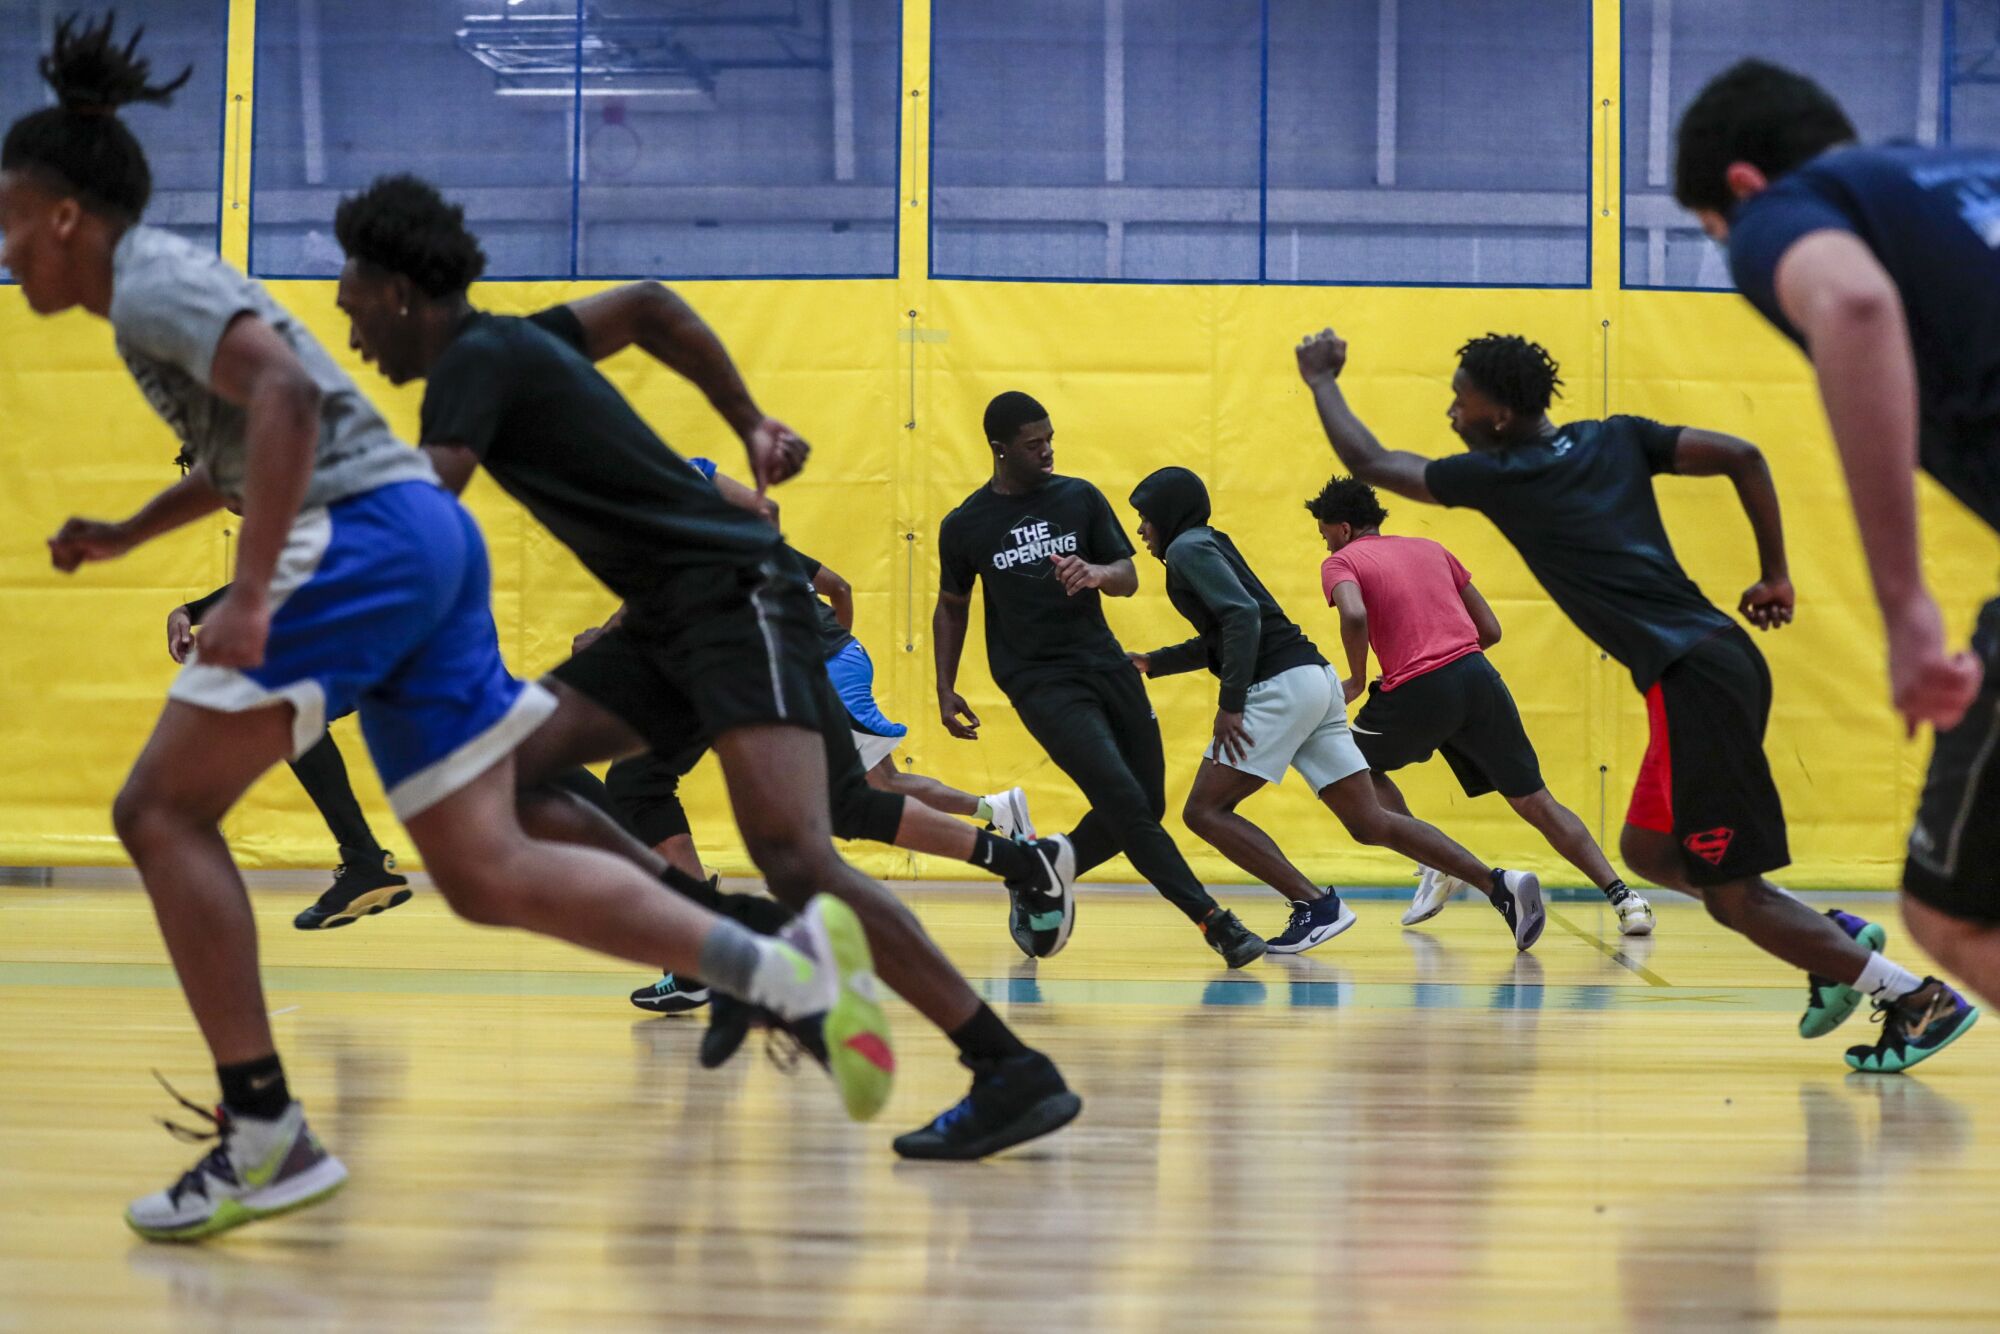 Flint basketball players run sprints in practice a day after losing Bendle.